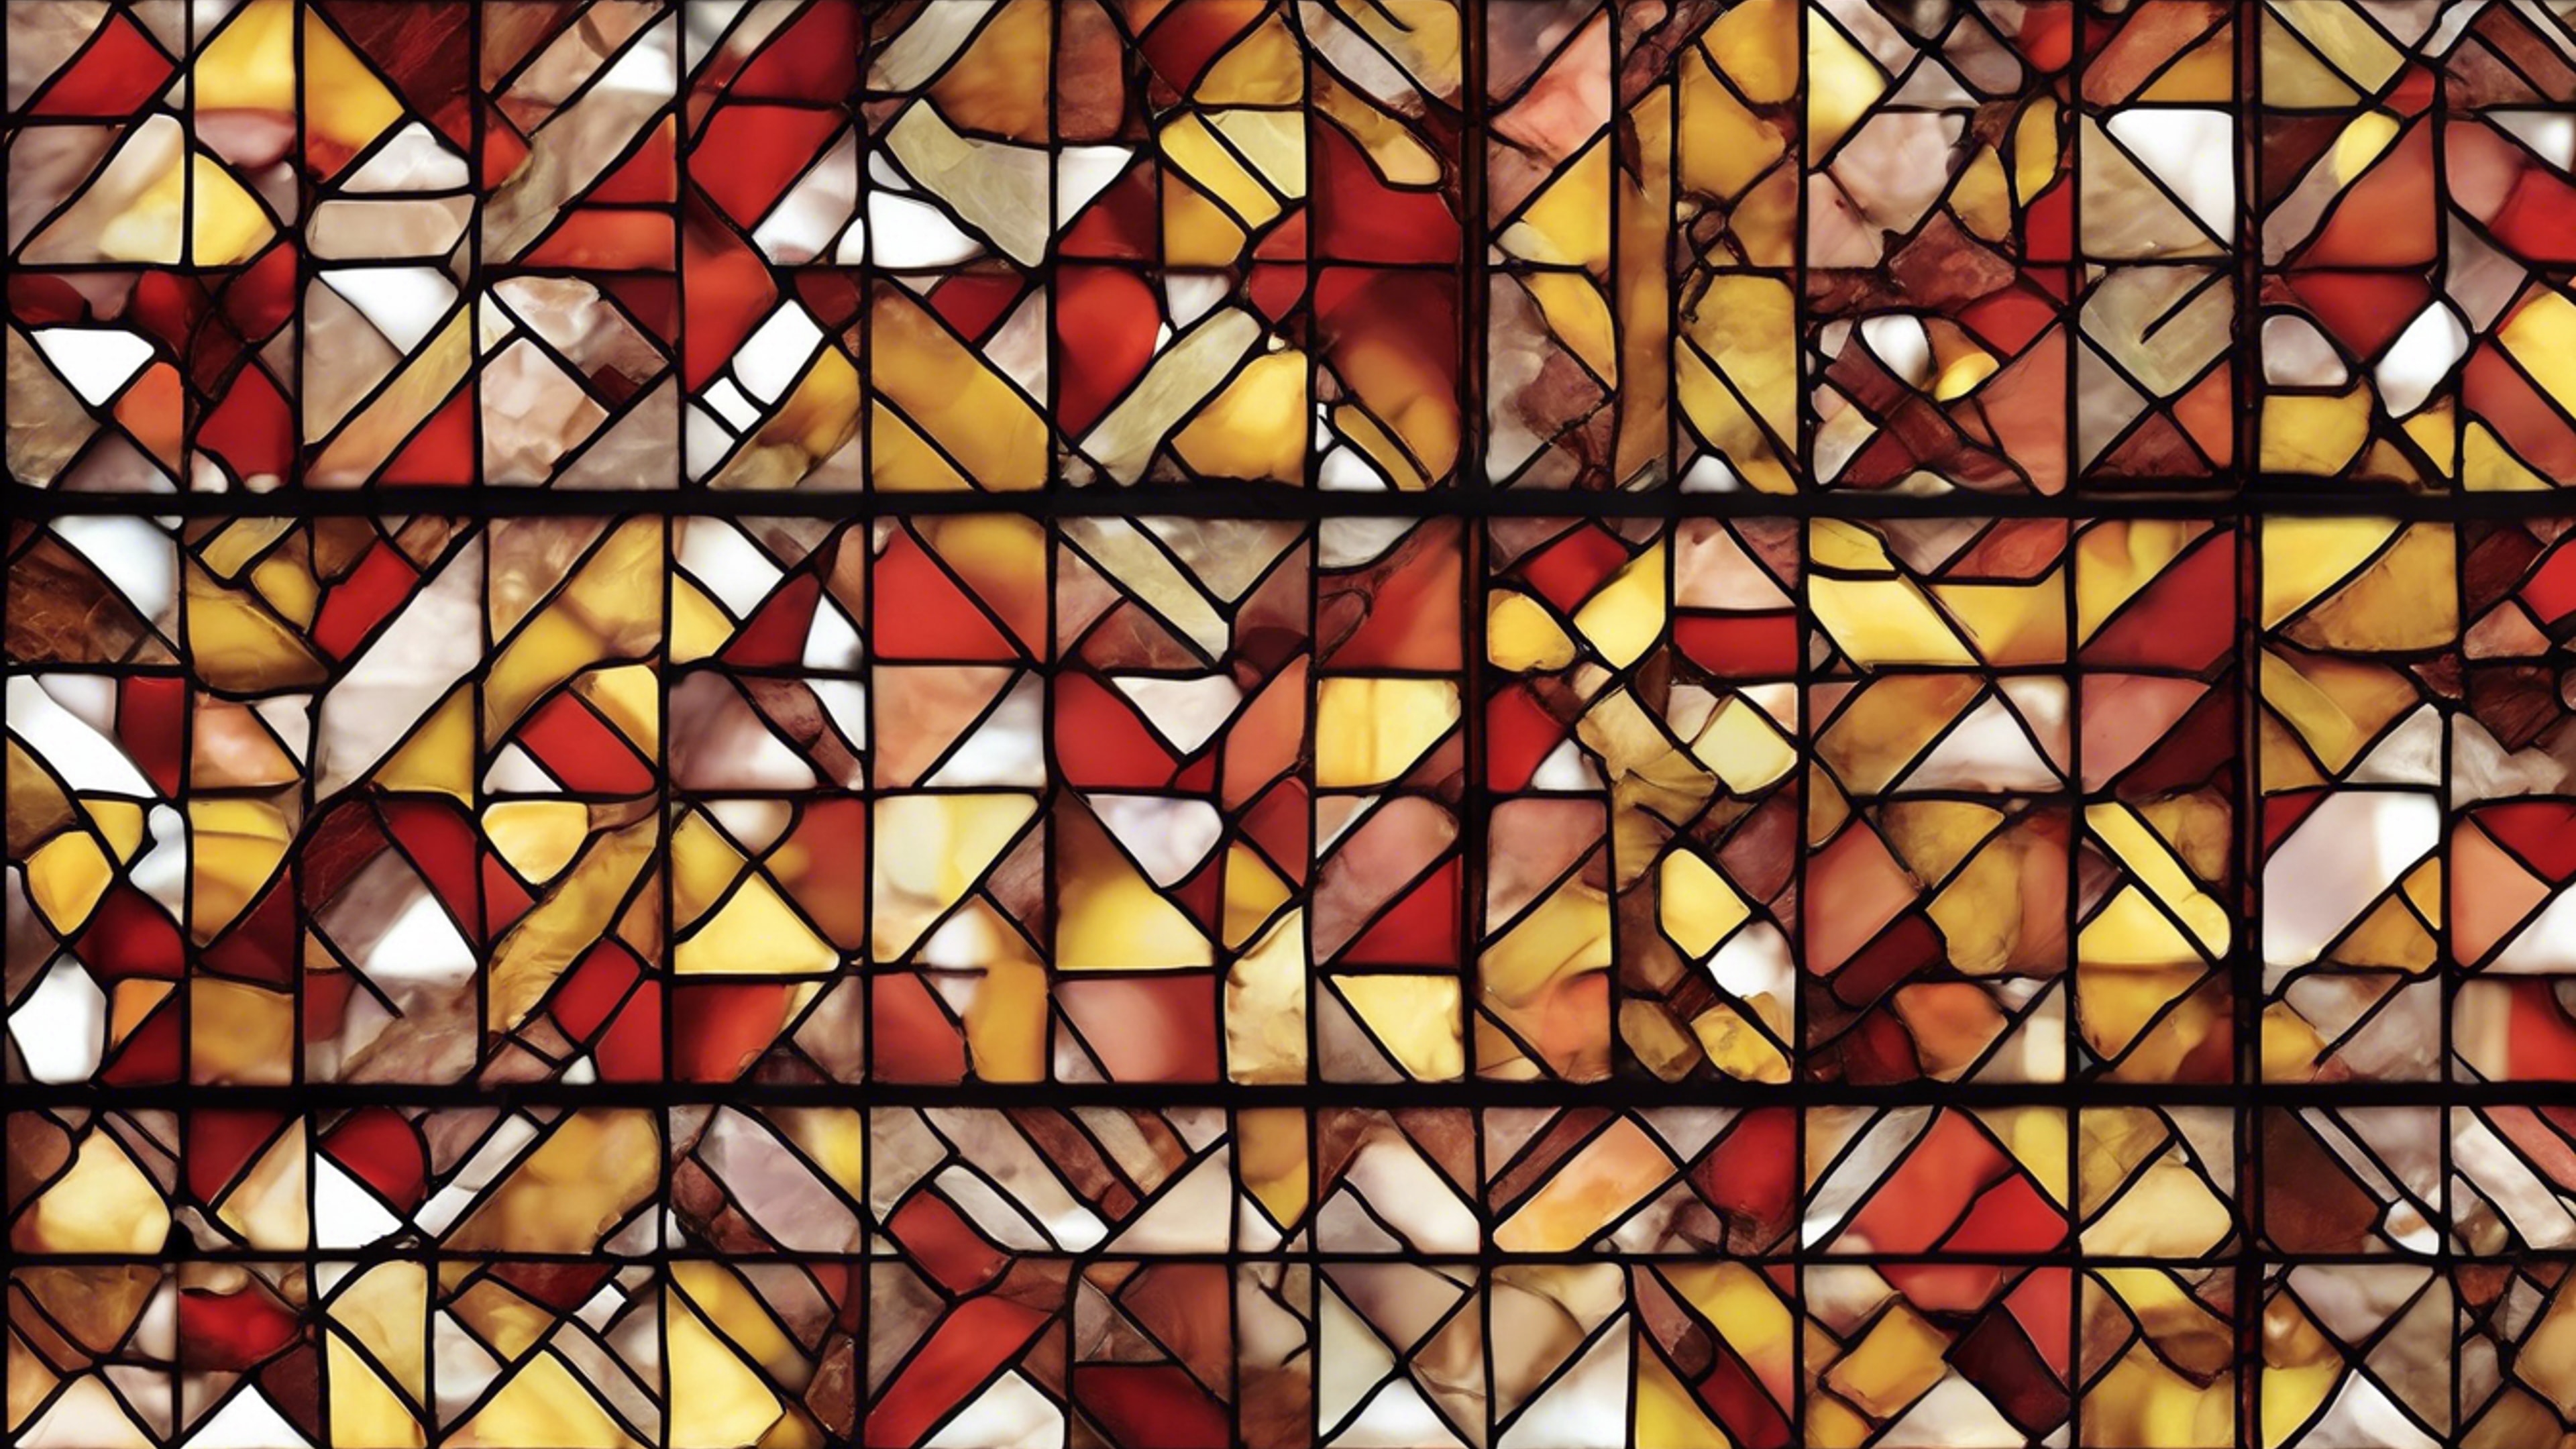 A stained glass design using a repeating motif of red and yellow bricks. Tapetai[d98aa8b1ebac46789cc9]